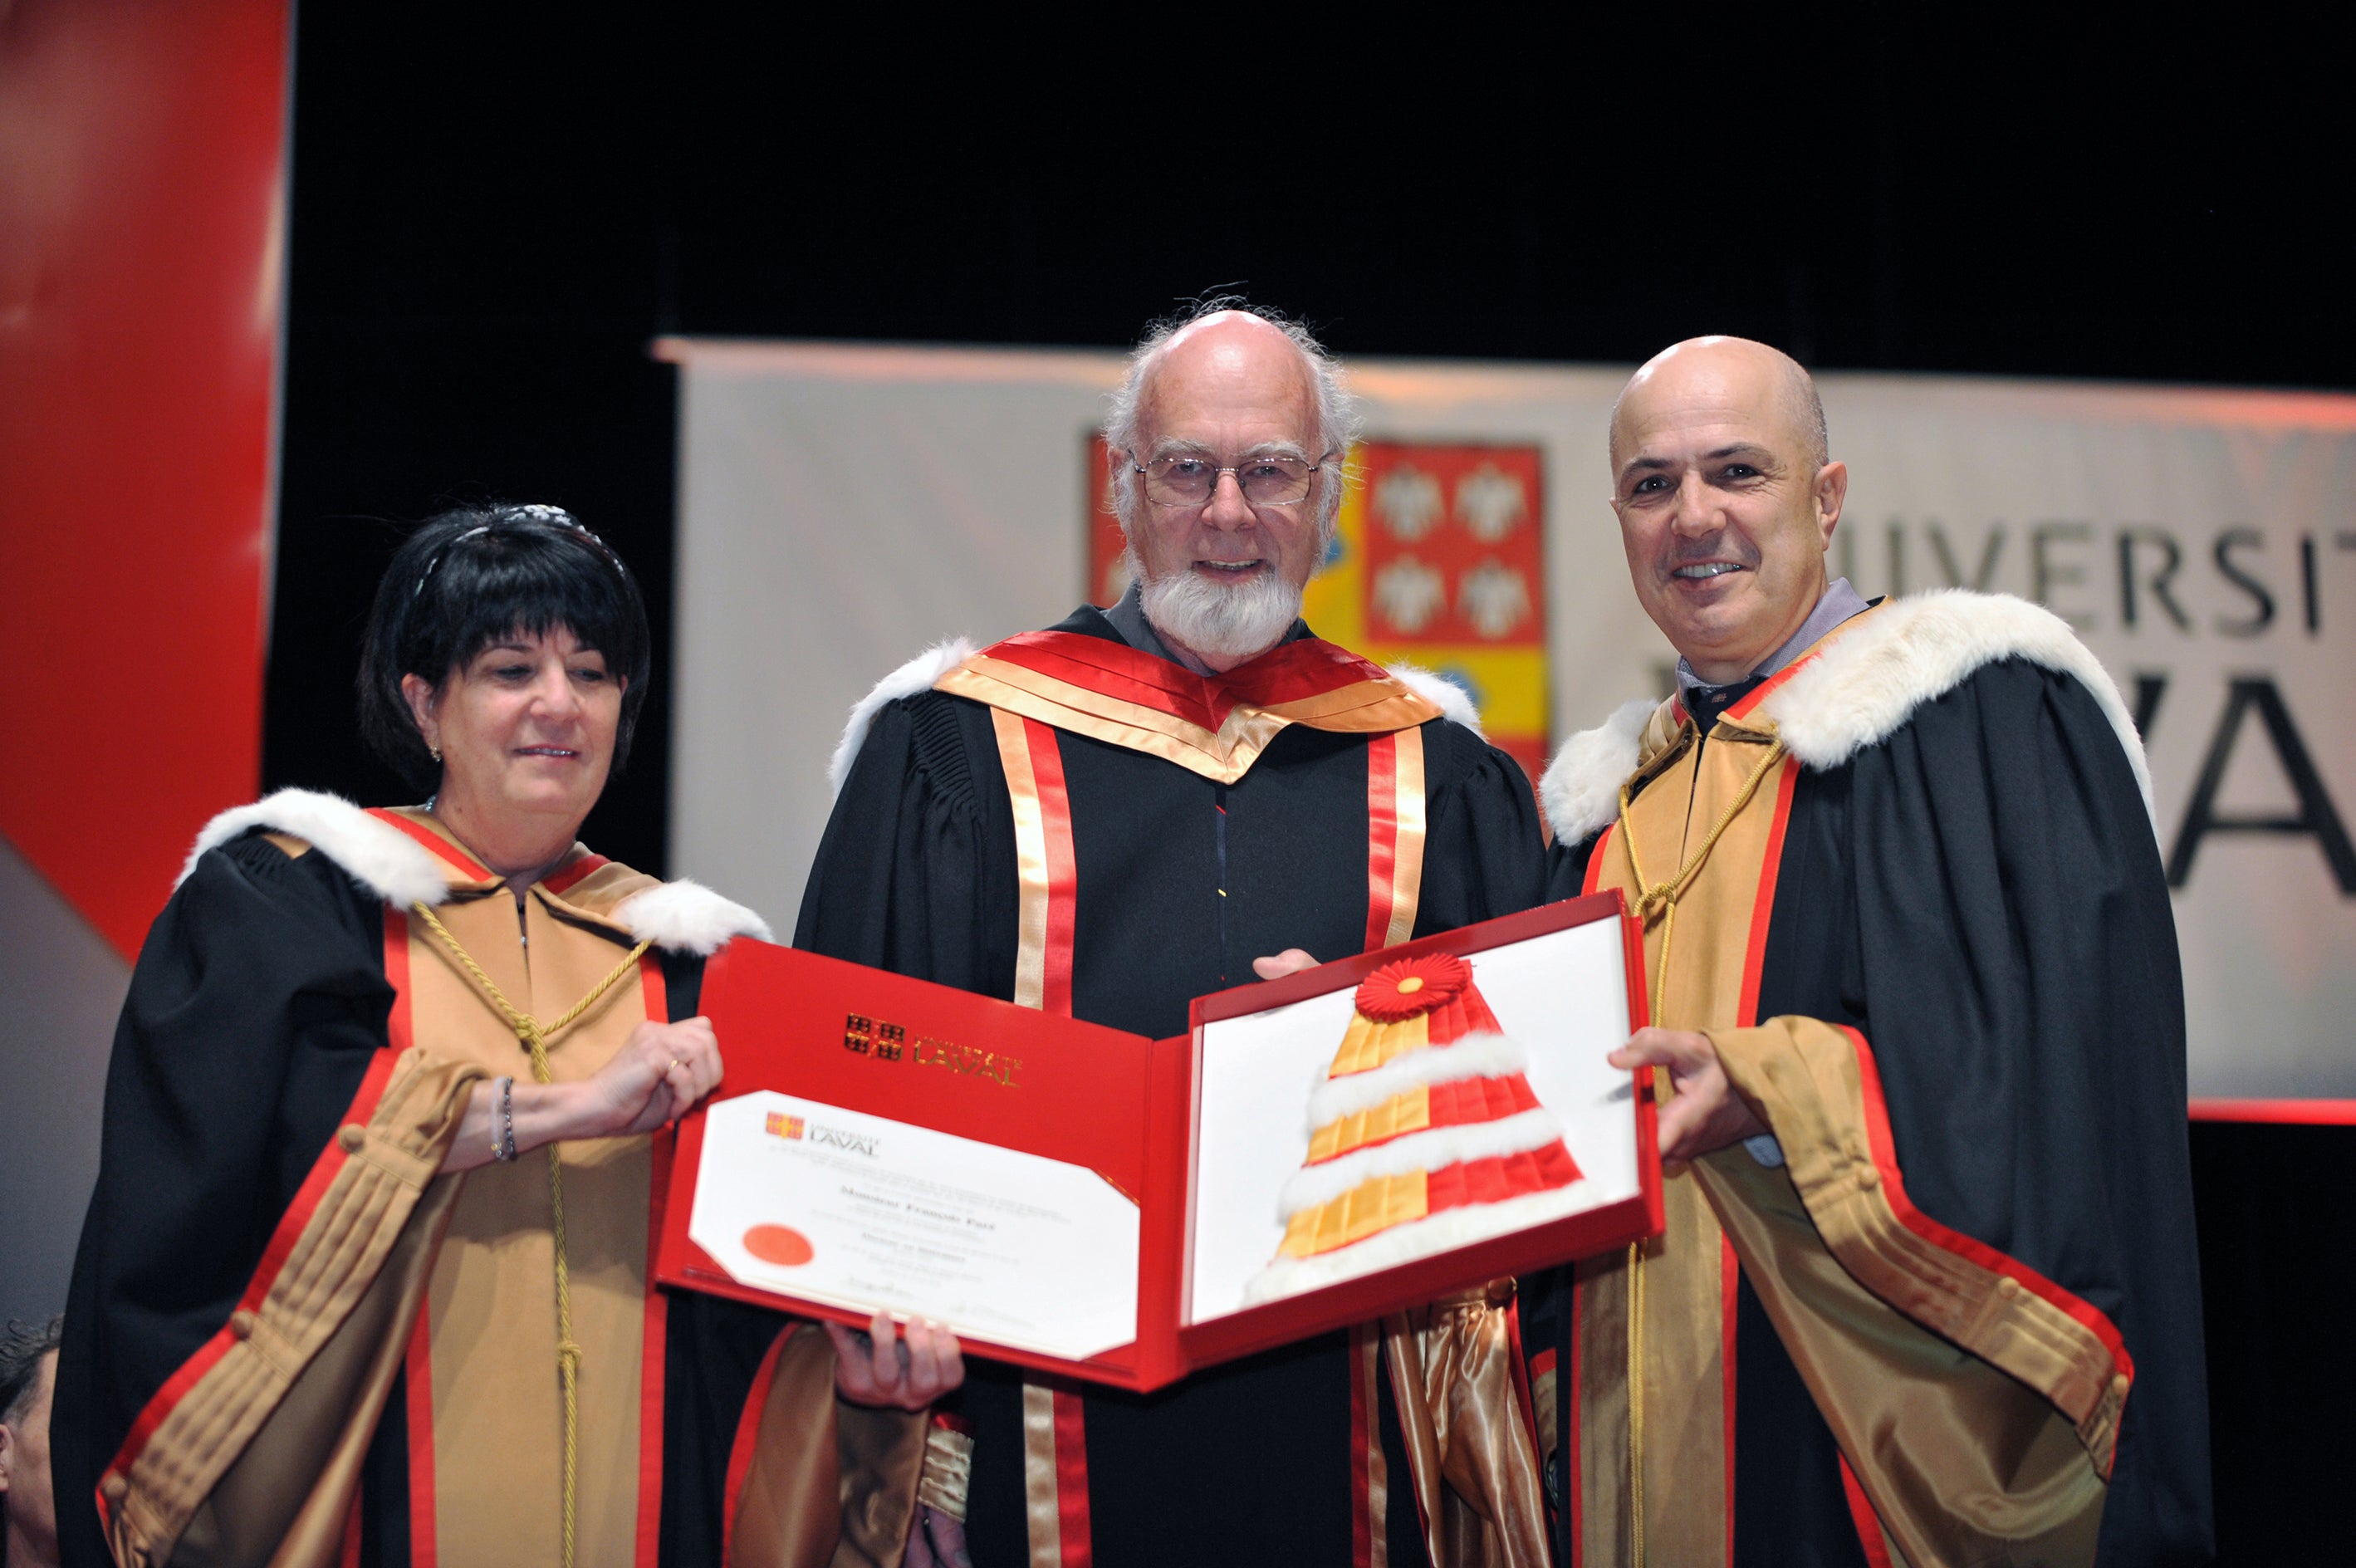 Francois Pare and two members of Laval in academic robes holding doctorate